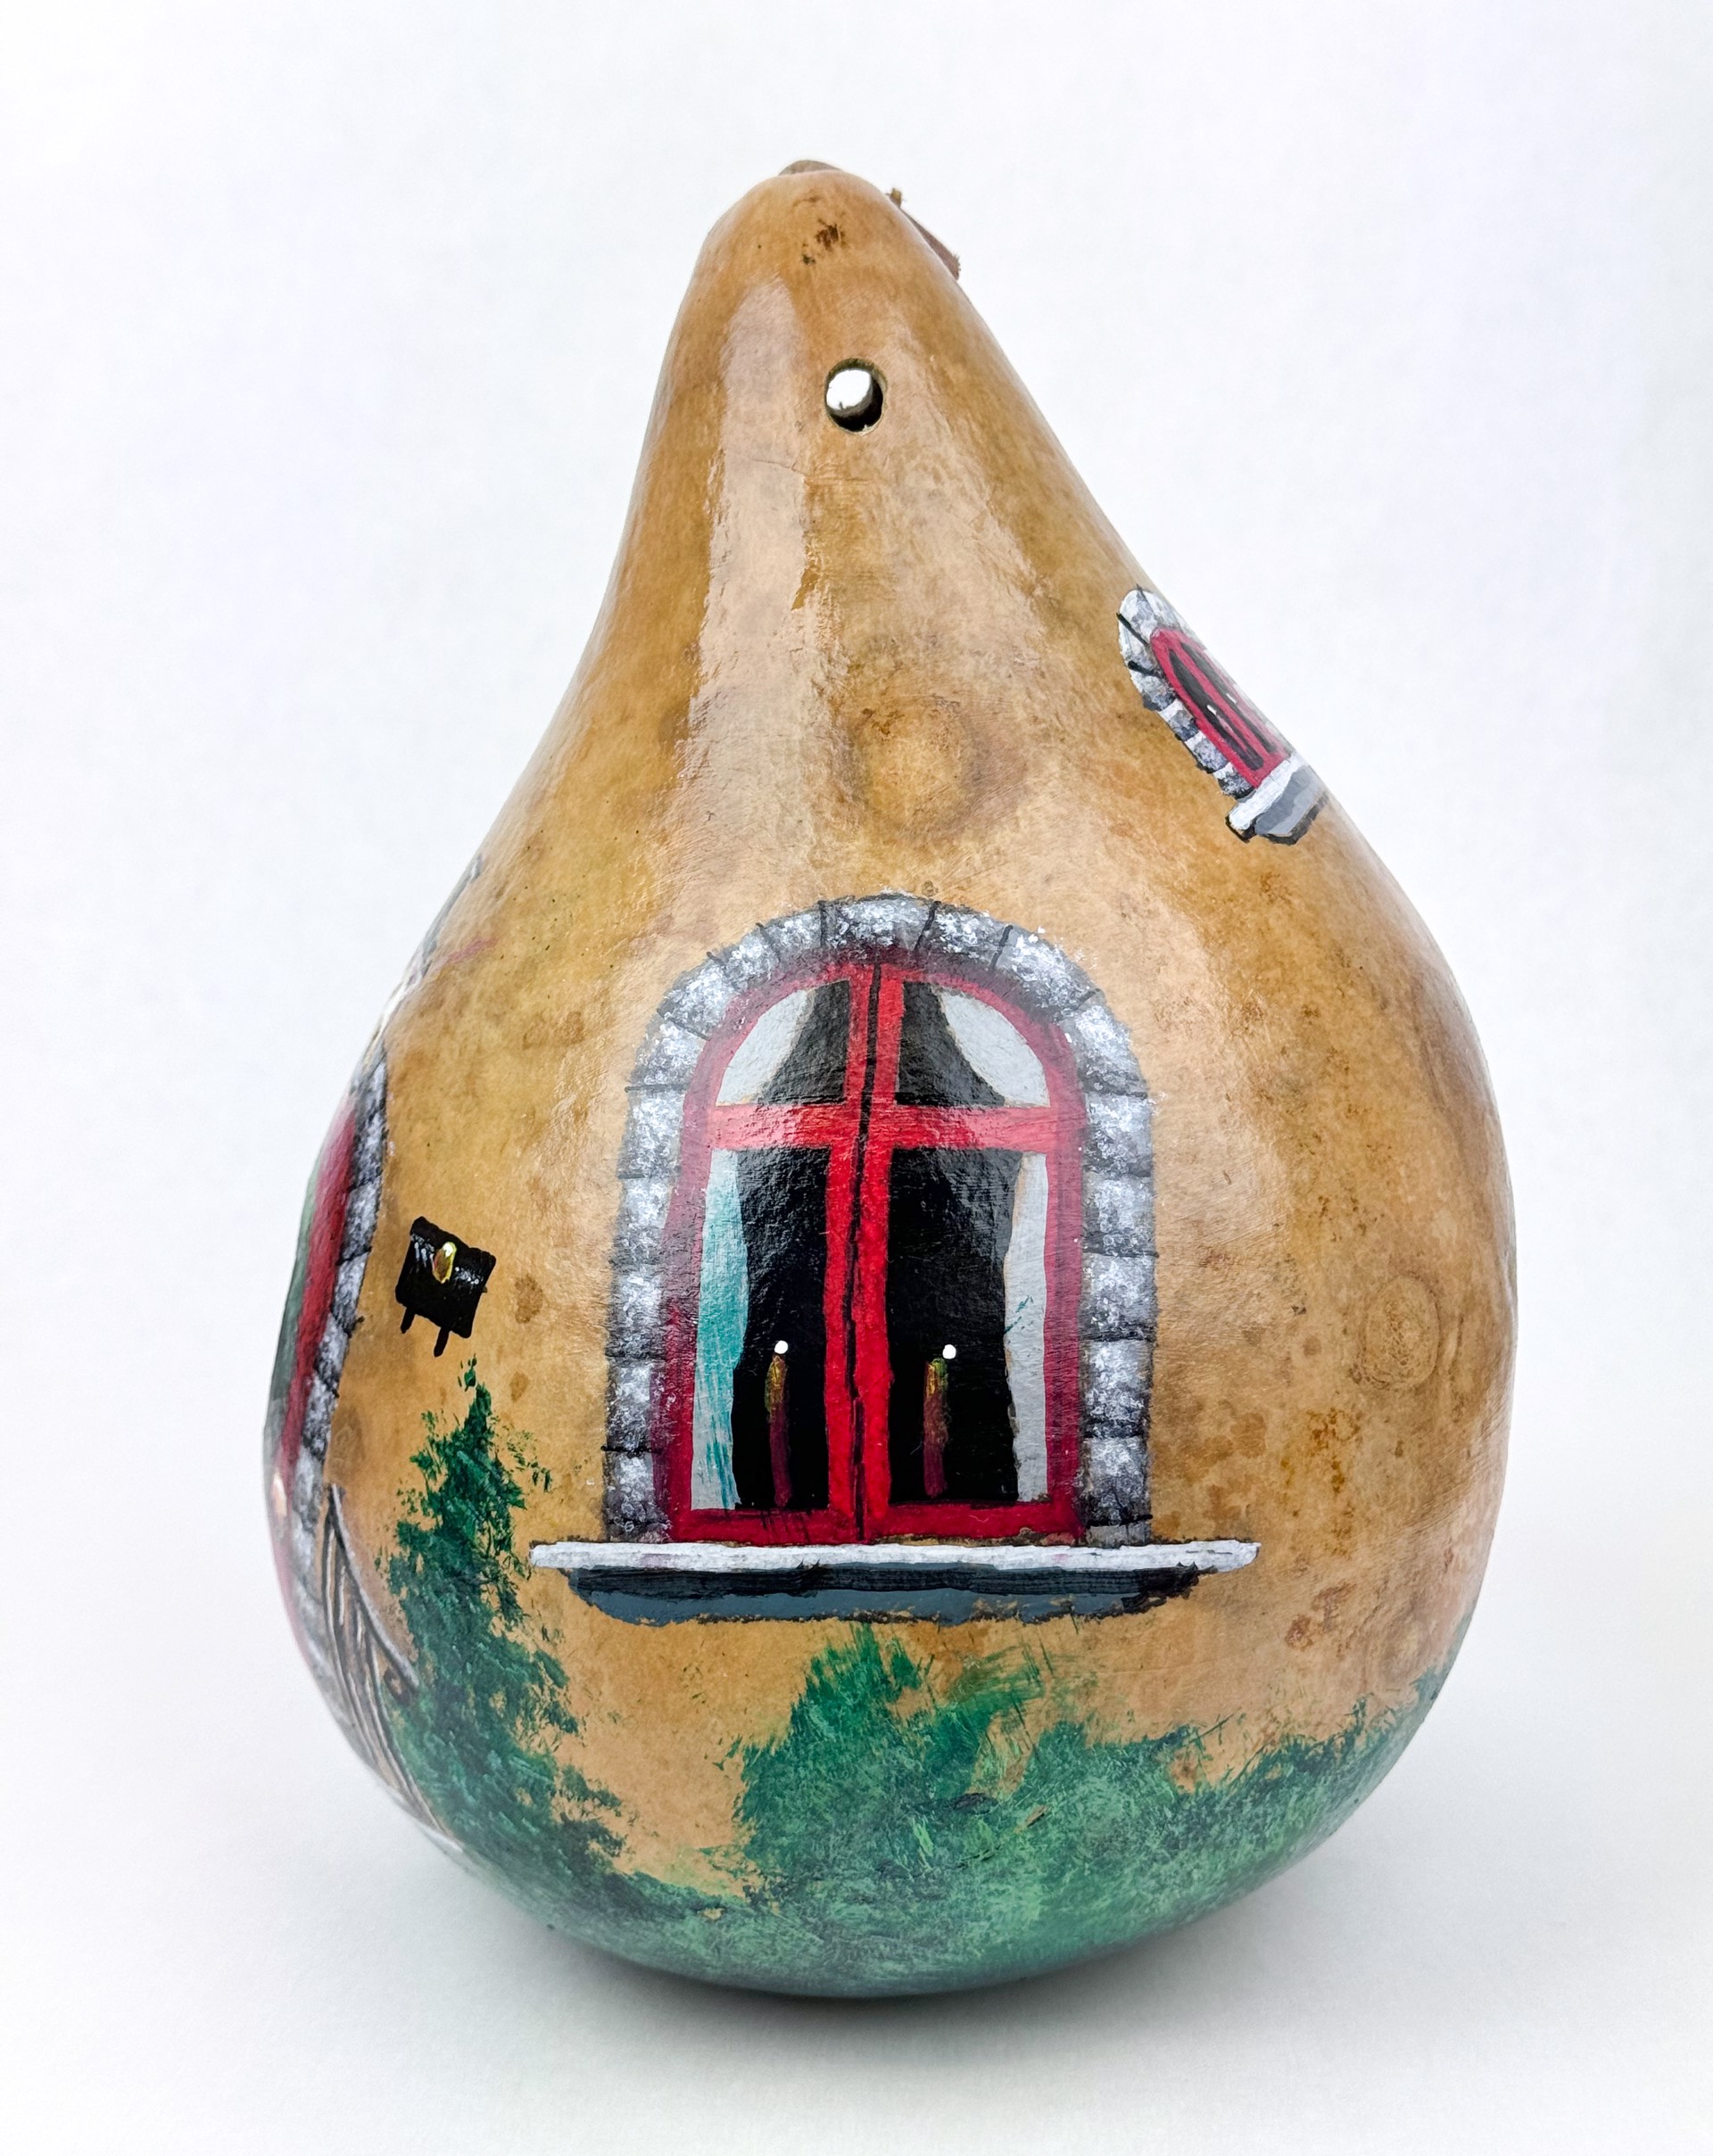 Home for the Holidays (gourd birdhouse) by Mike Knox